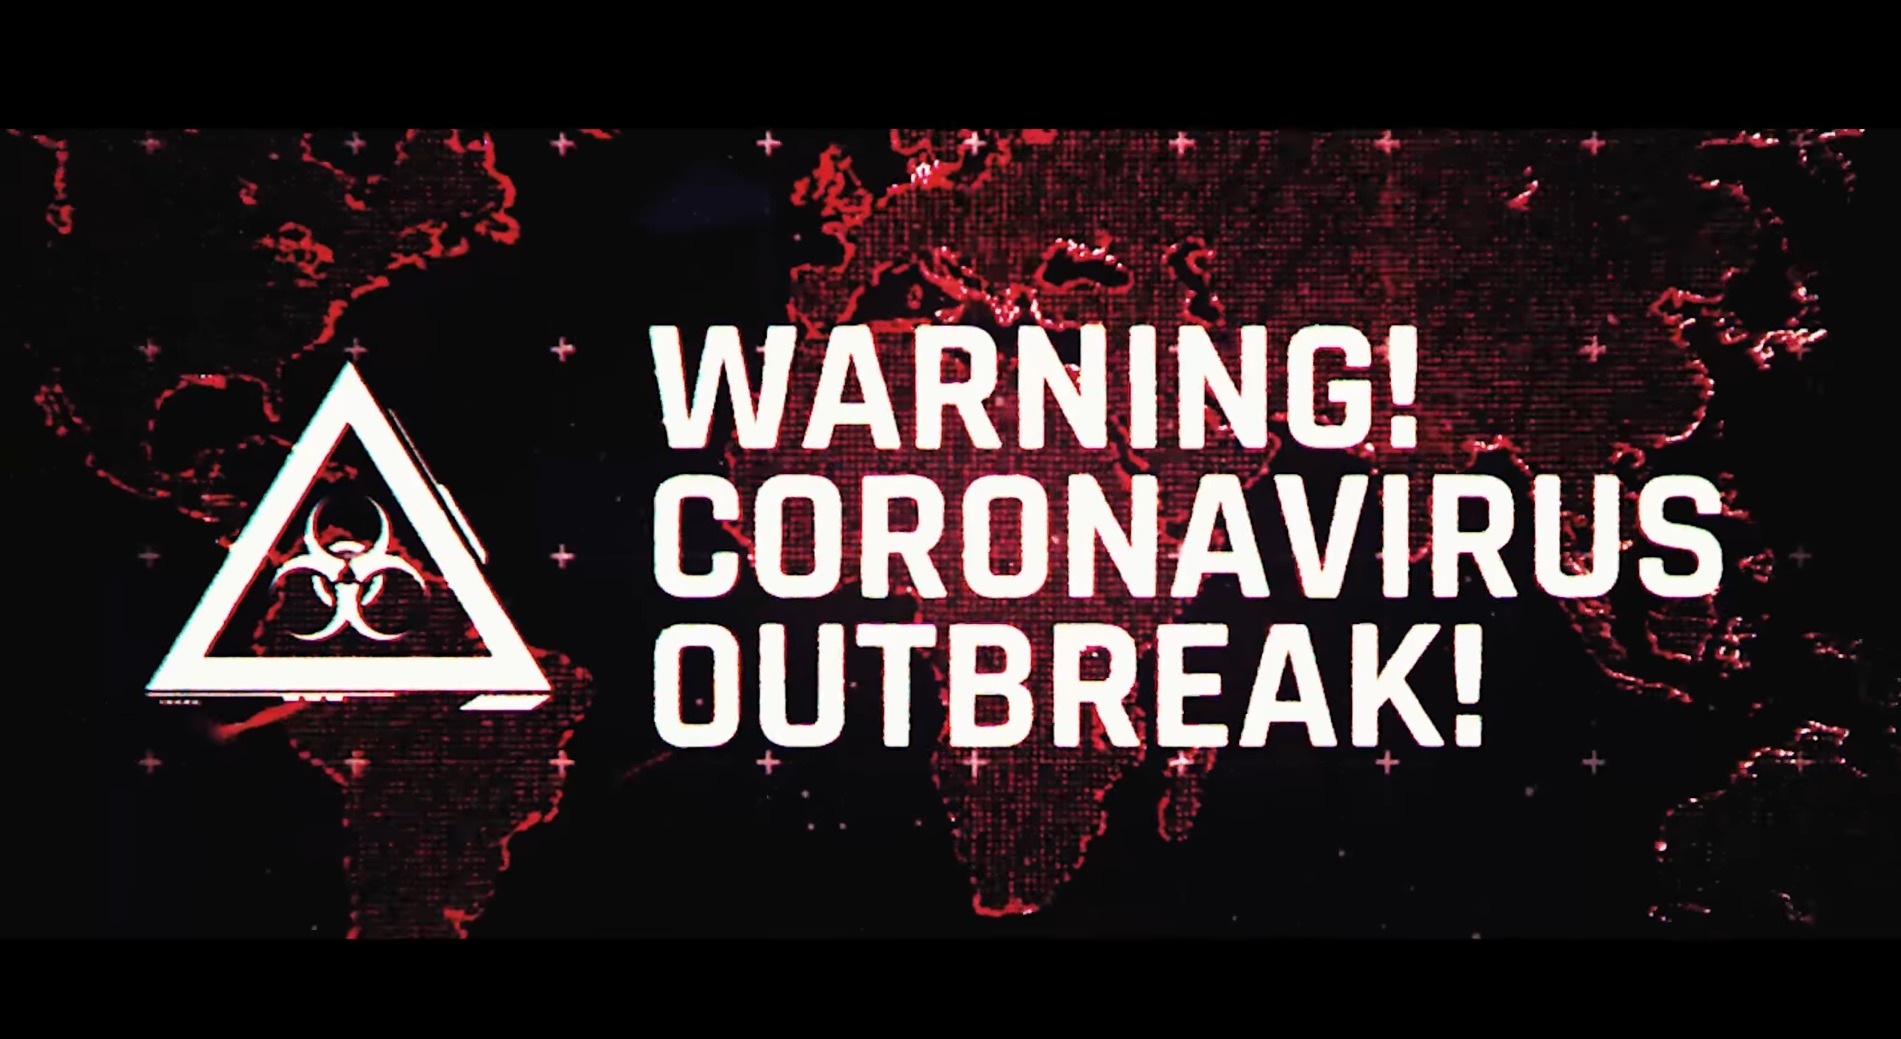 COVID: The Outbreak Is A New Pandemic Style Simulation Game Expected To Launch Later This Month